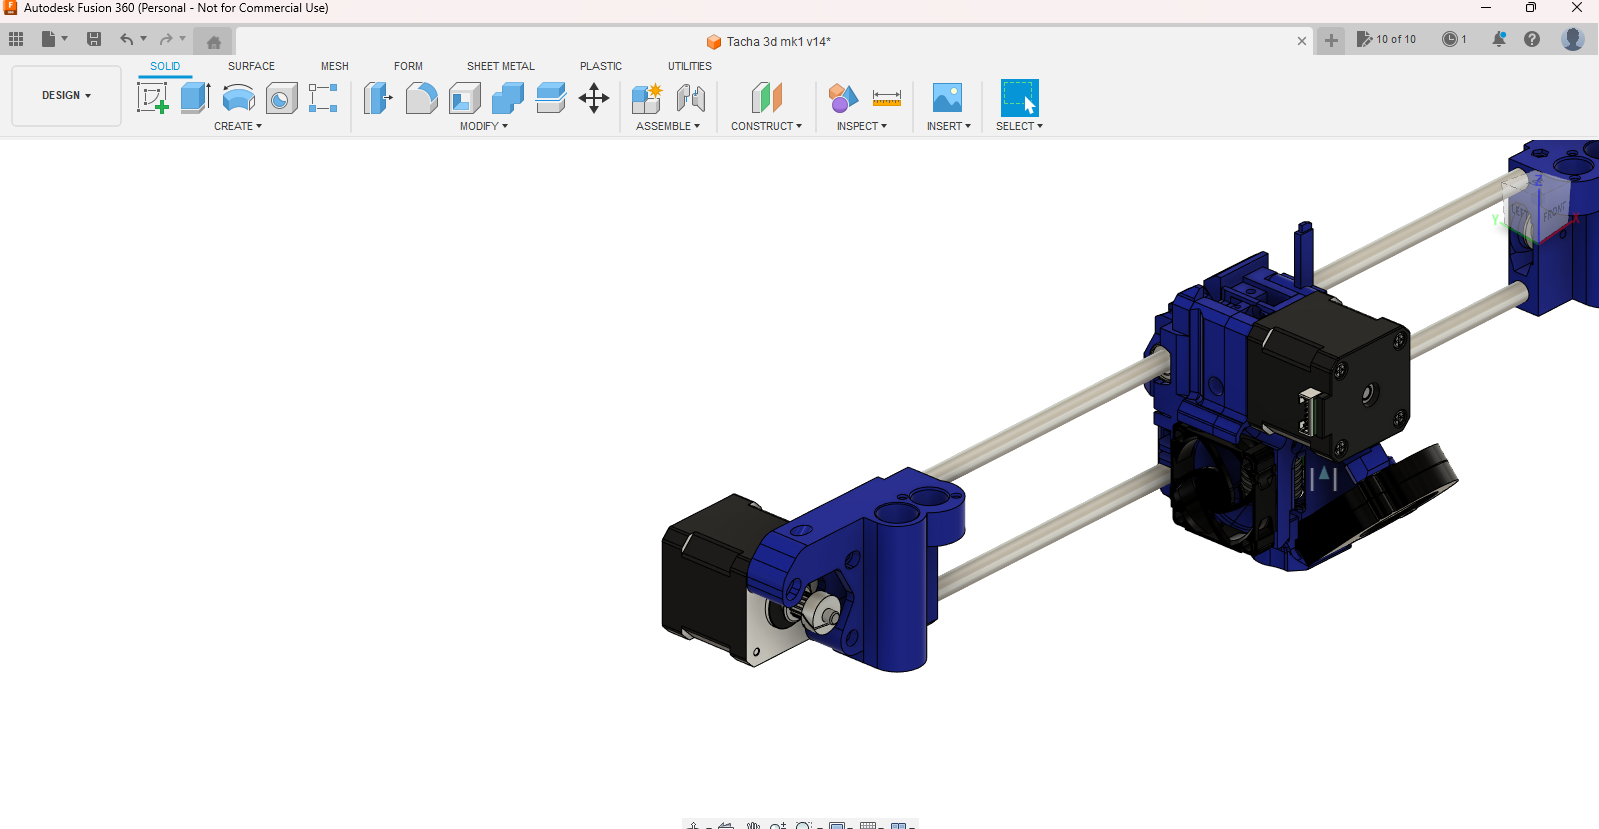 Autodesk Fusion 360 (Personal - Not for Commercial Use) 6_30_2023 9_08_31 PM.png